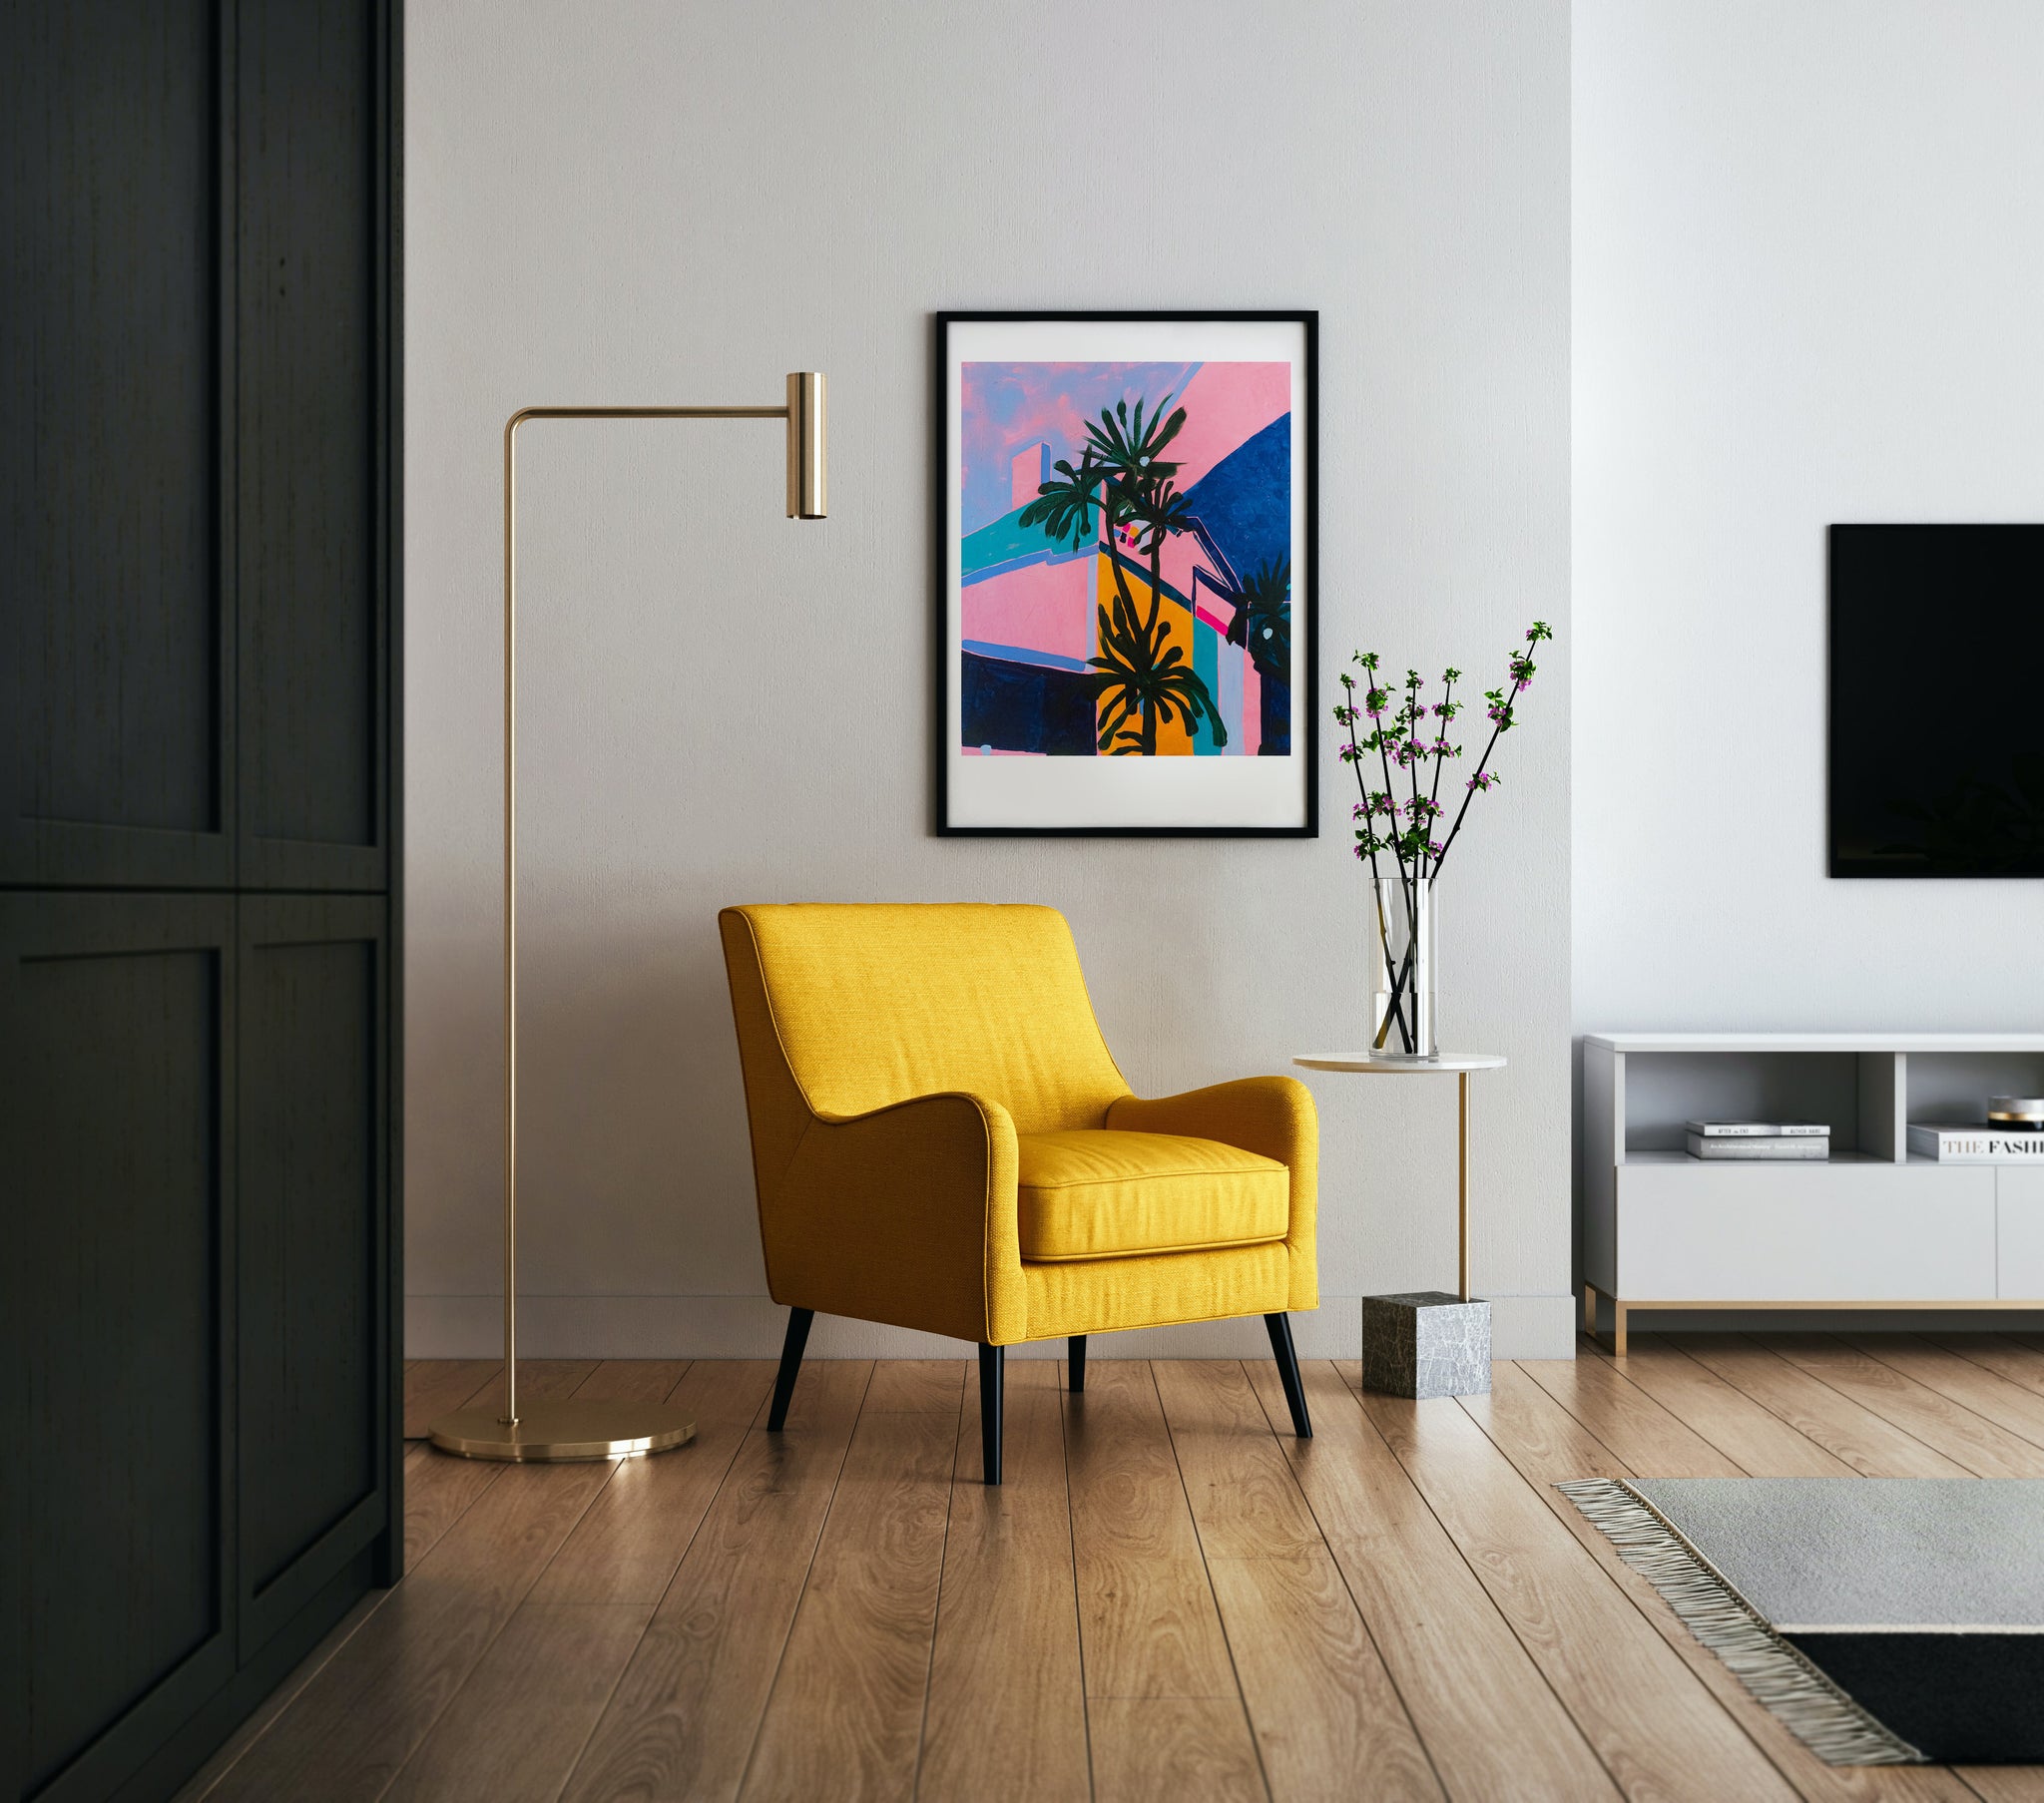 How To Buy Art For Your Home